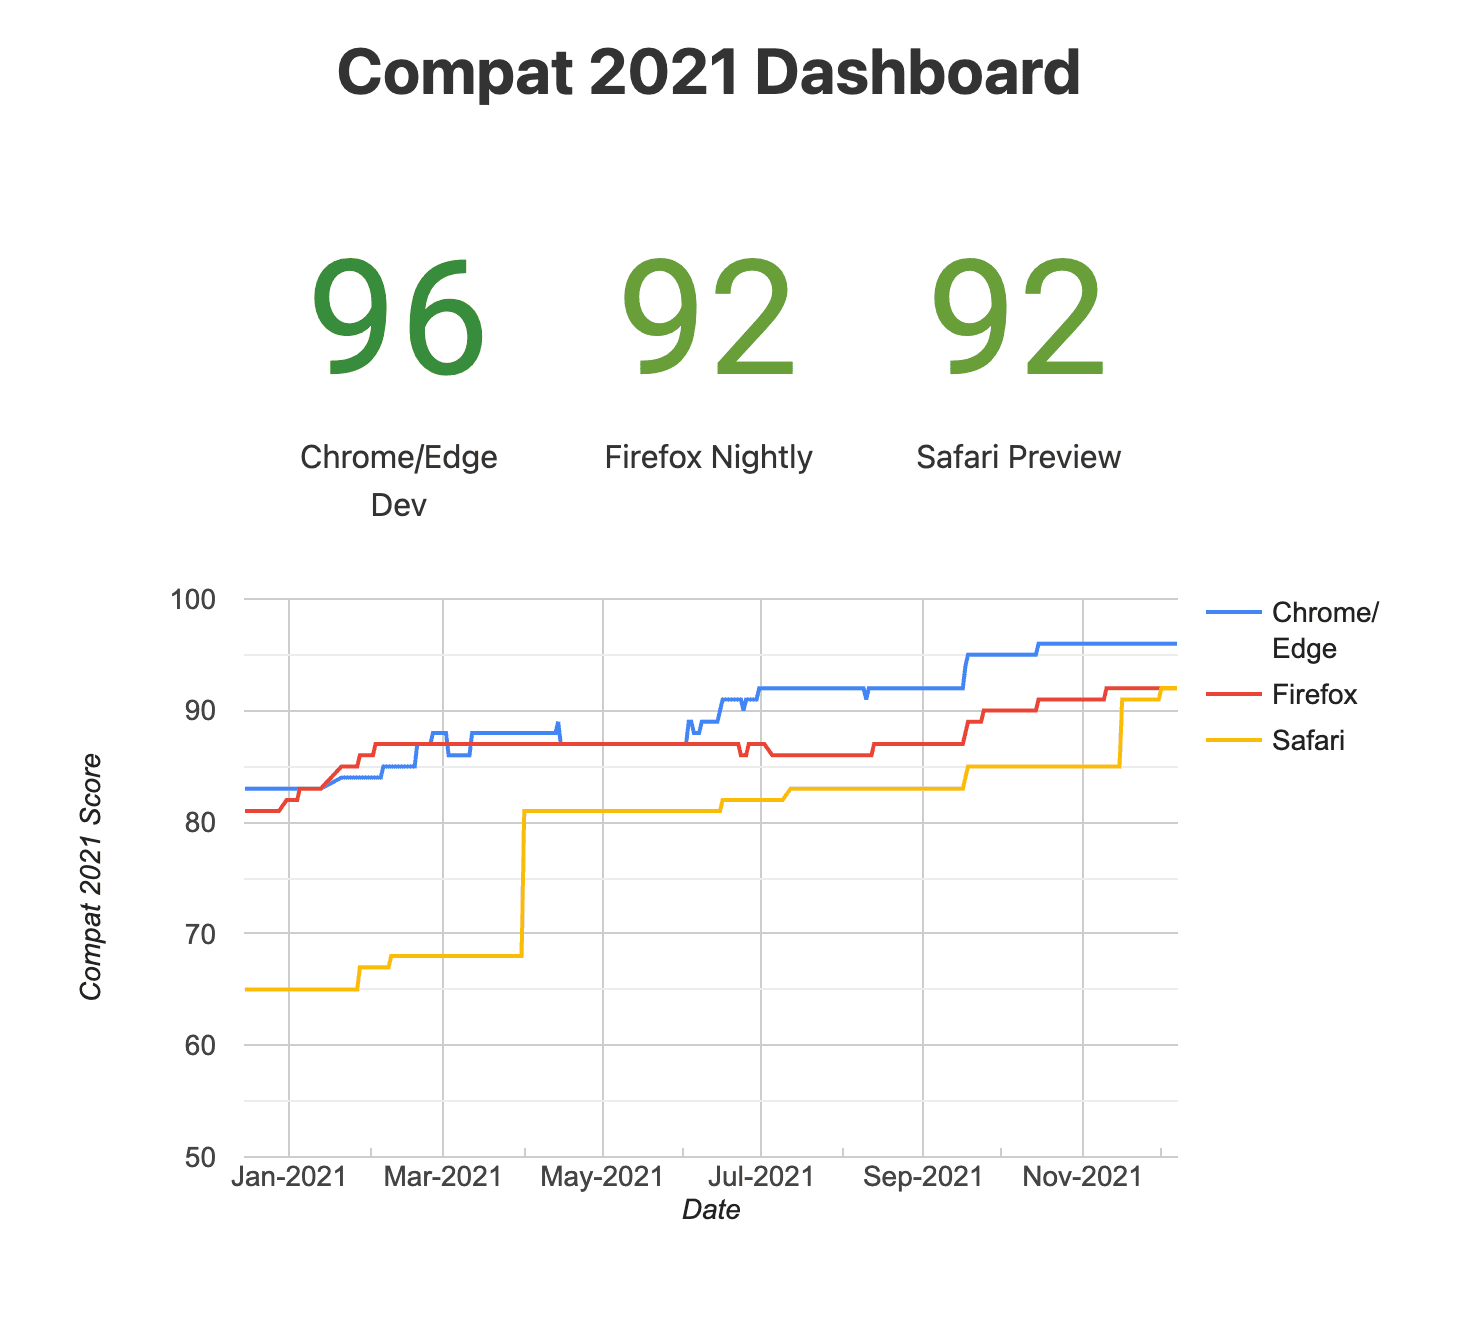 A snapshot of Compat
2021 Dashboard (experimental browsers)